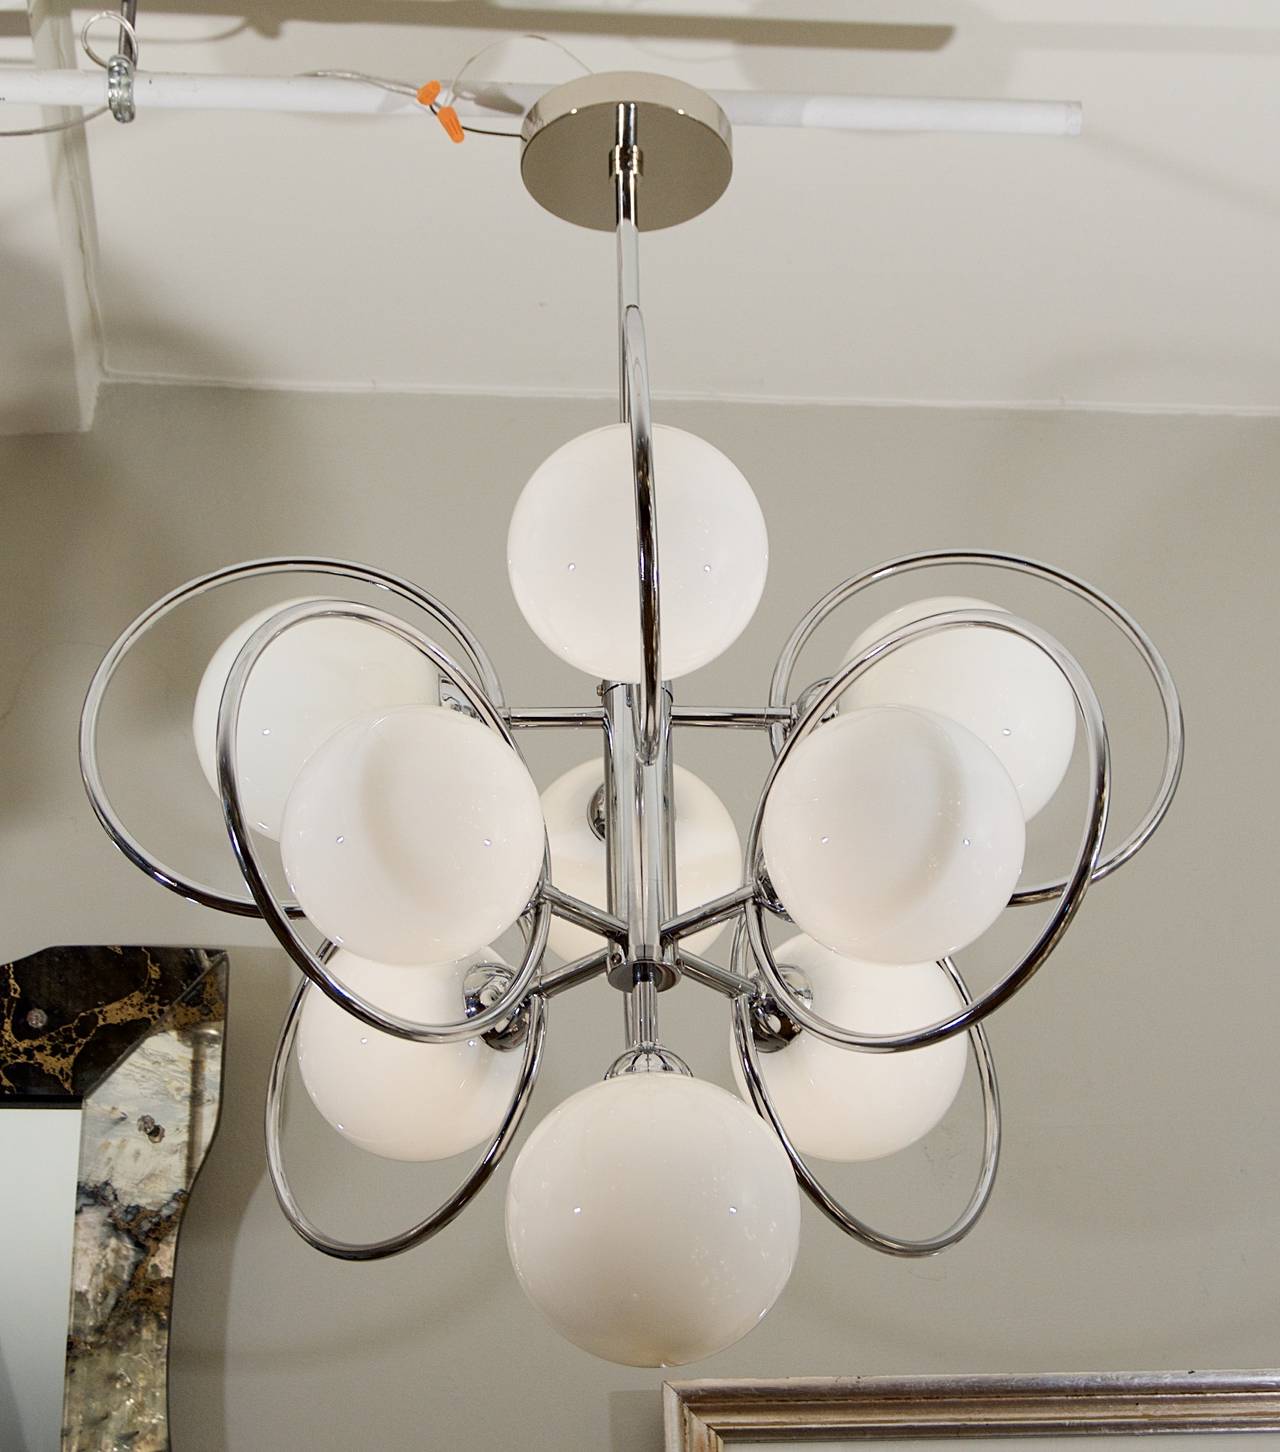 Elegant with an edge. A wonderful addition to all decors. White glossy finish globes and polished chrome make this a stand out piece.

Eight E-14 base bulbs up to 40 watts per socket, new wiring.

Height is of chandelier body only; height as